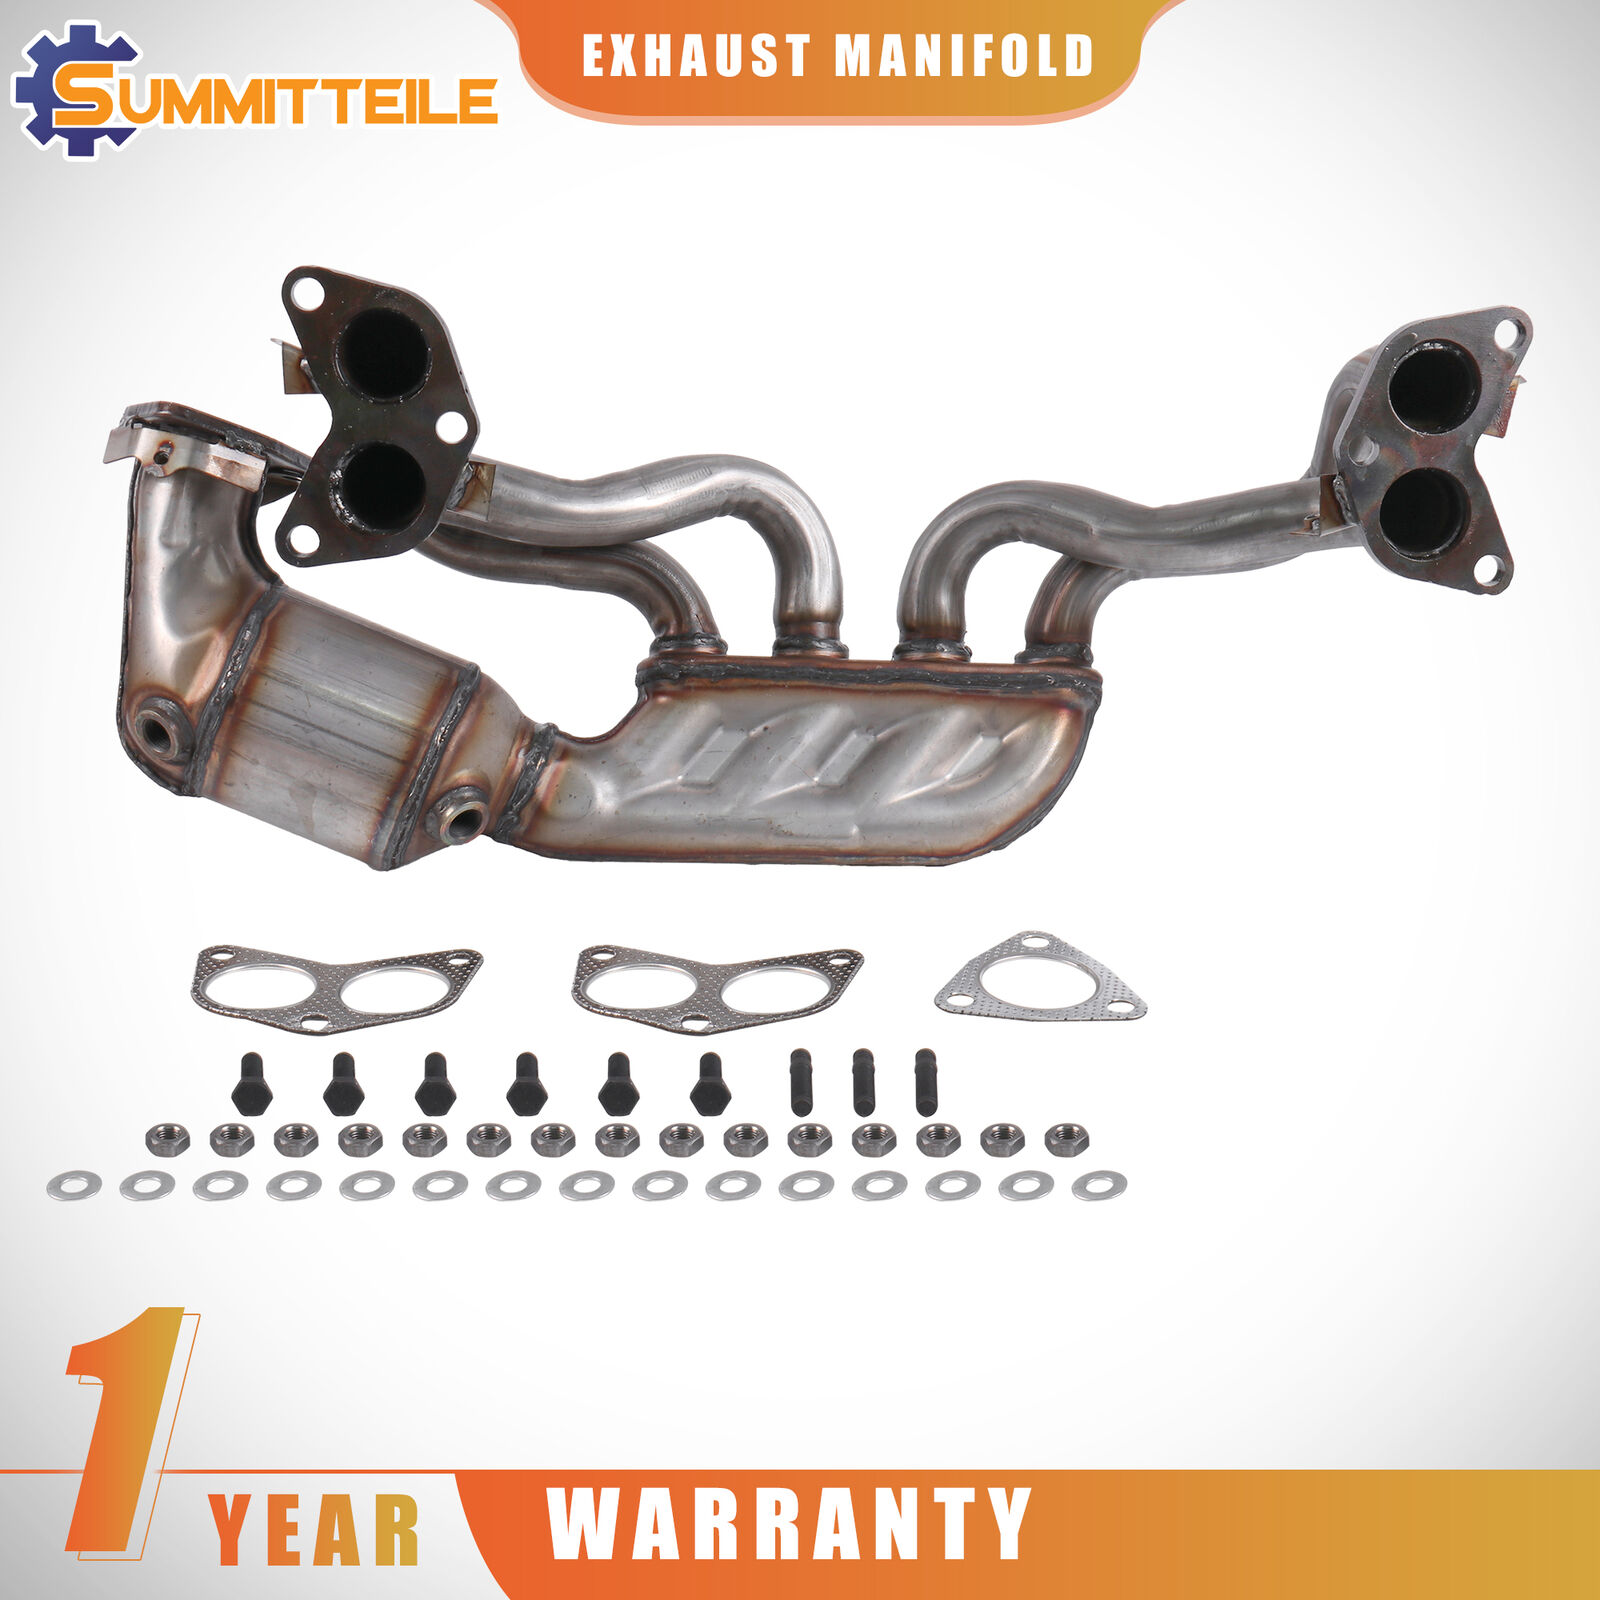 Exhaust Manifold Catalytic Converter & Kits For Legacy Outback Foreste Impreza